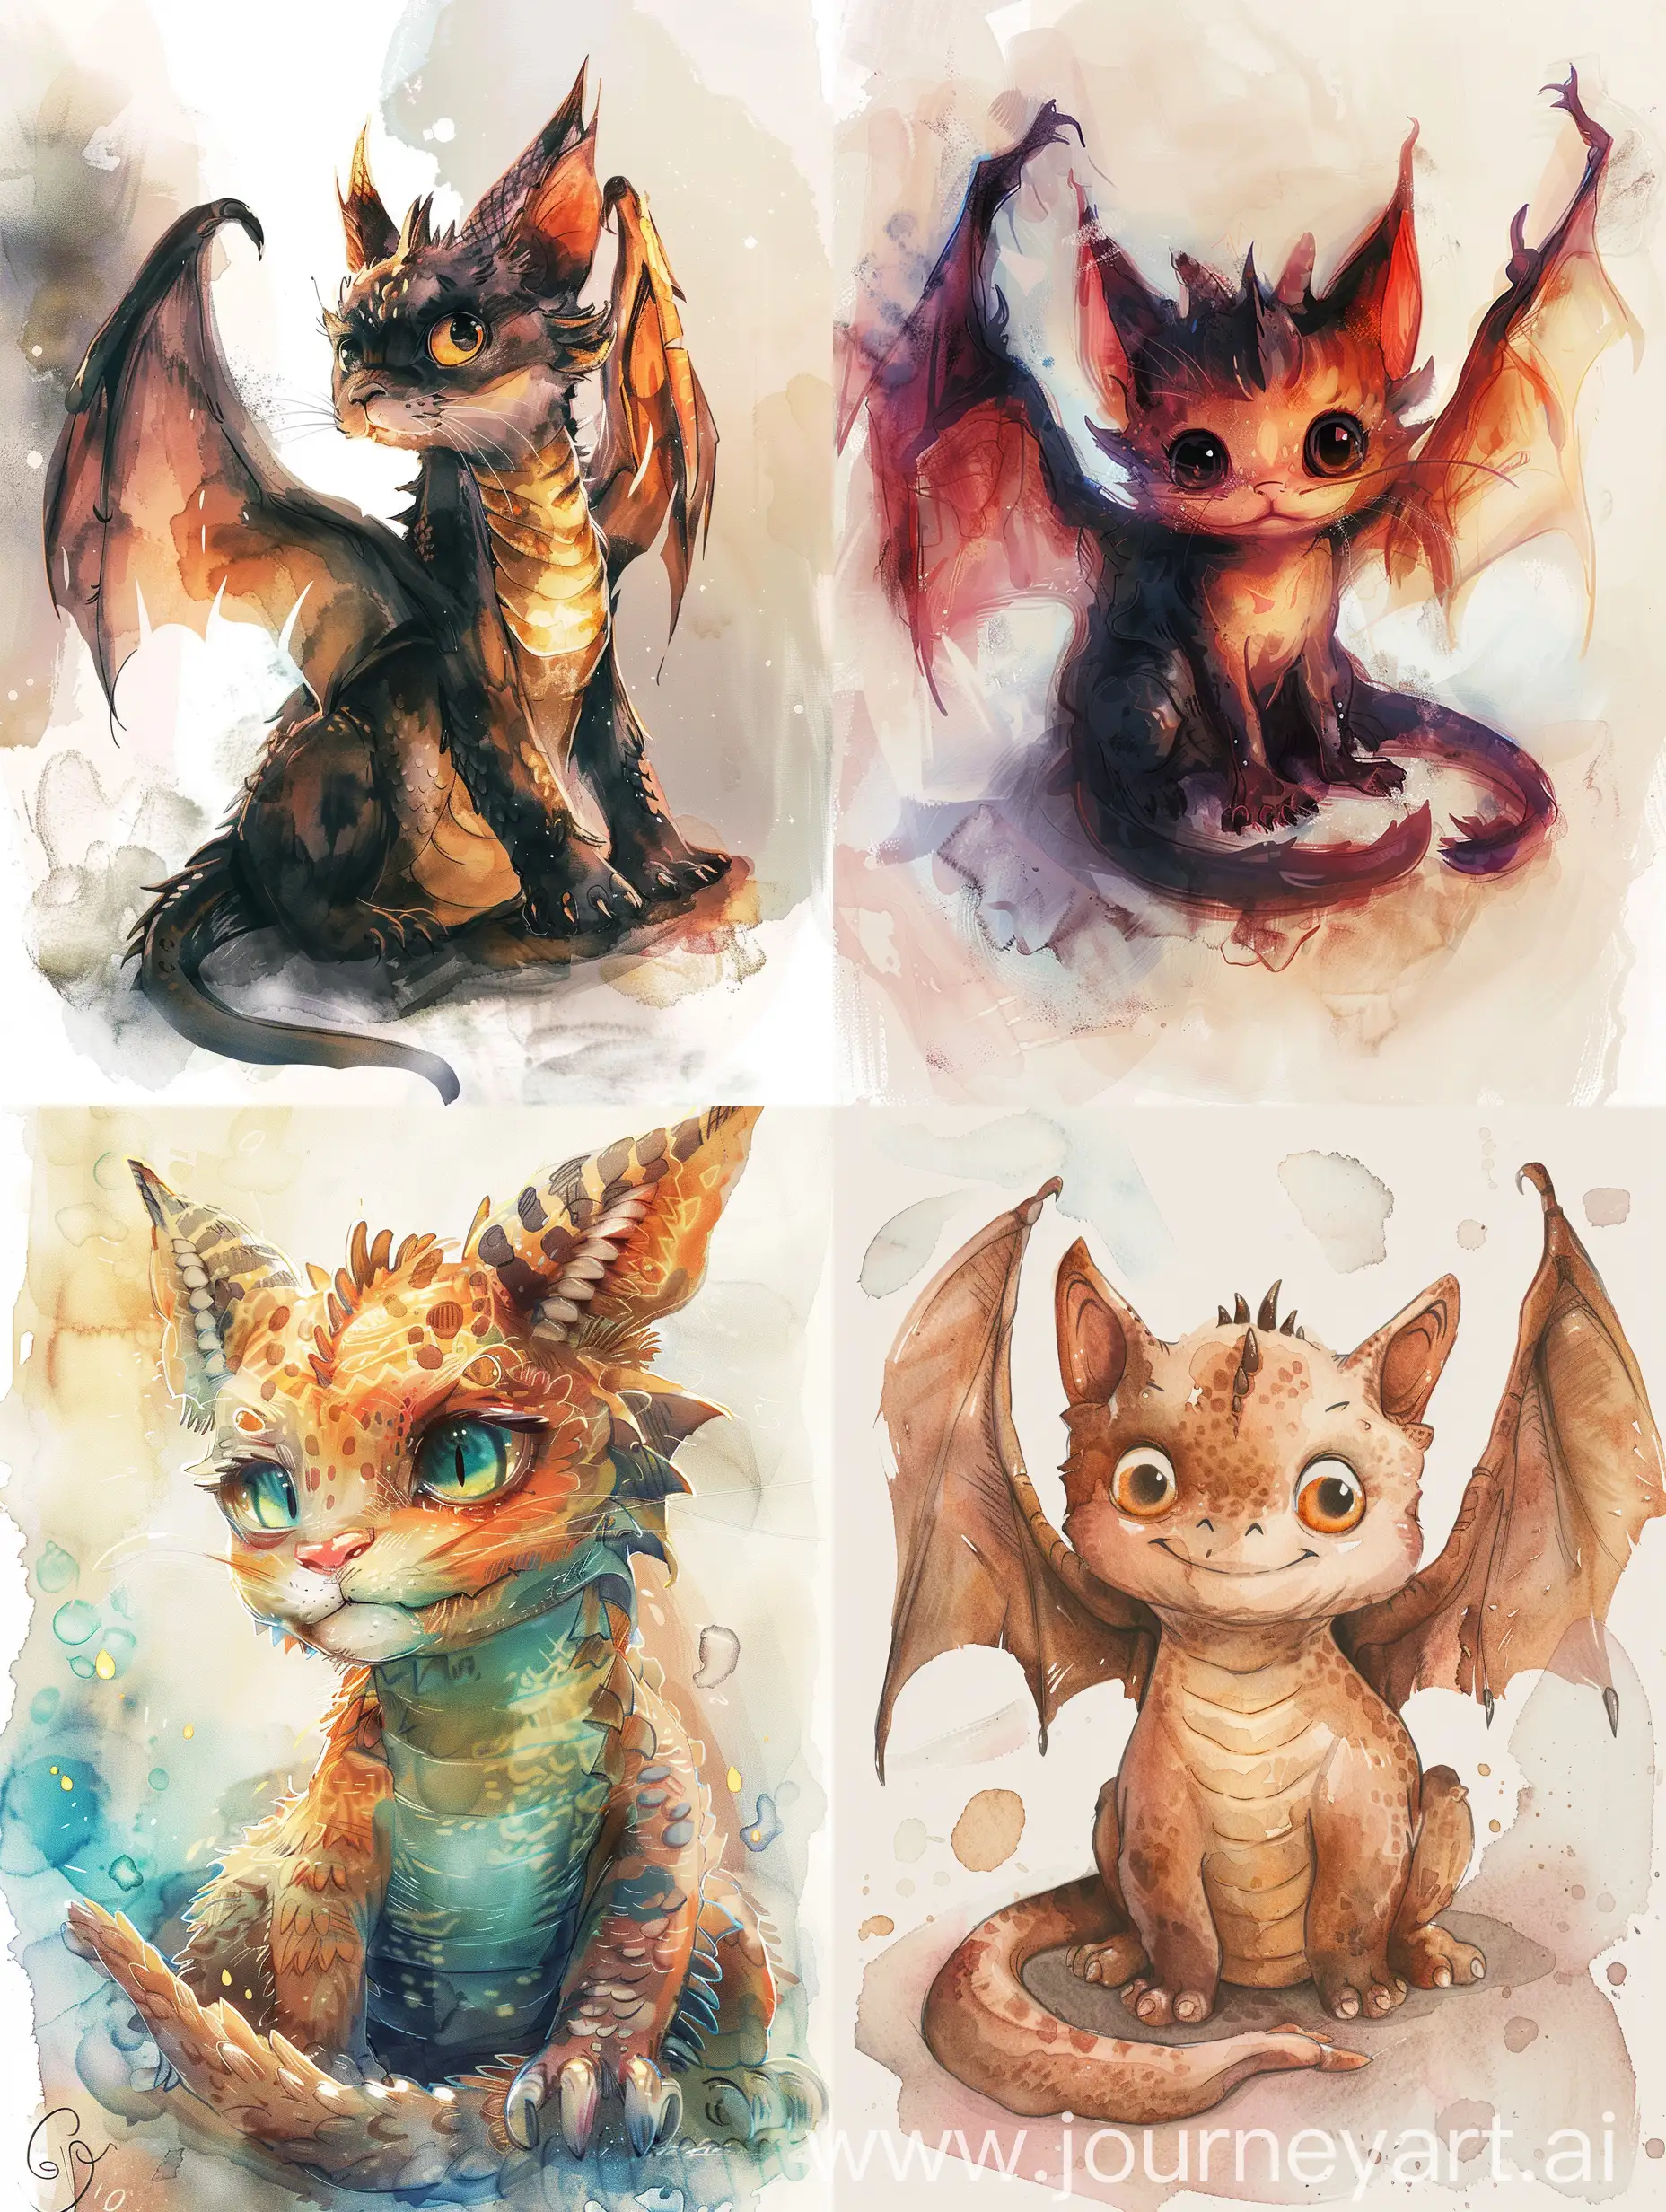 monstrous but a little bit cute dragon 6 years old with cat features, anime water color style